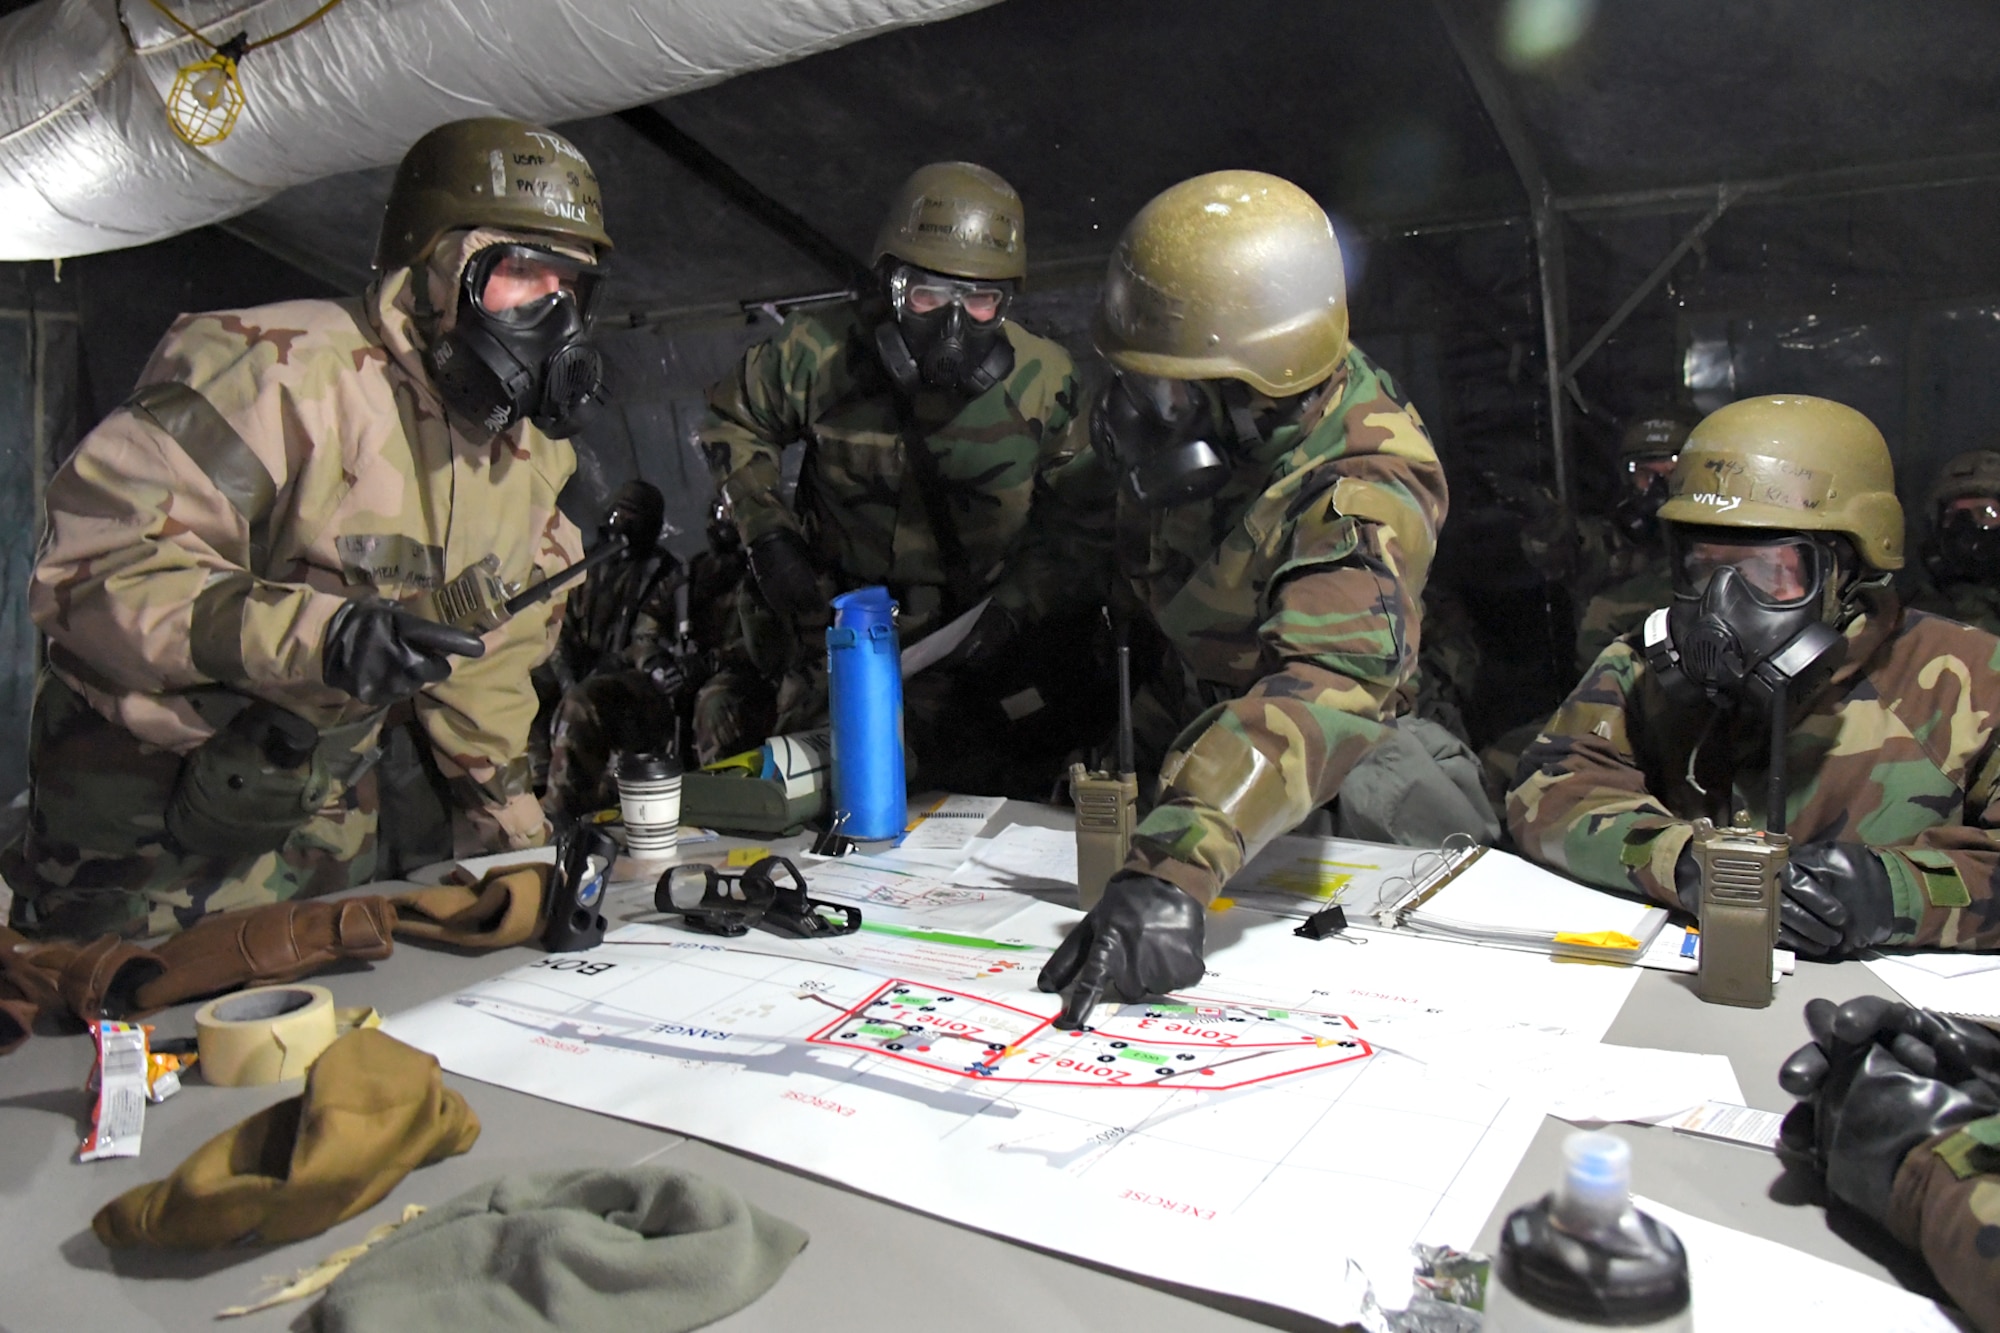 Airmen during a readiness exercise, Feb. 7, 2019, at Hill Air Force Base, Utah. During the exercise, Airmen donned mission-oriented projective posture, or MOPP, gear and were assessed on performing different tasks in a simulated toxic environment to improve their operational readiness. (U.S. Air Force photo by Todd Cromar)